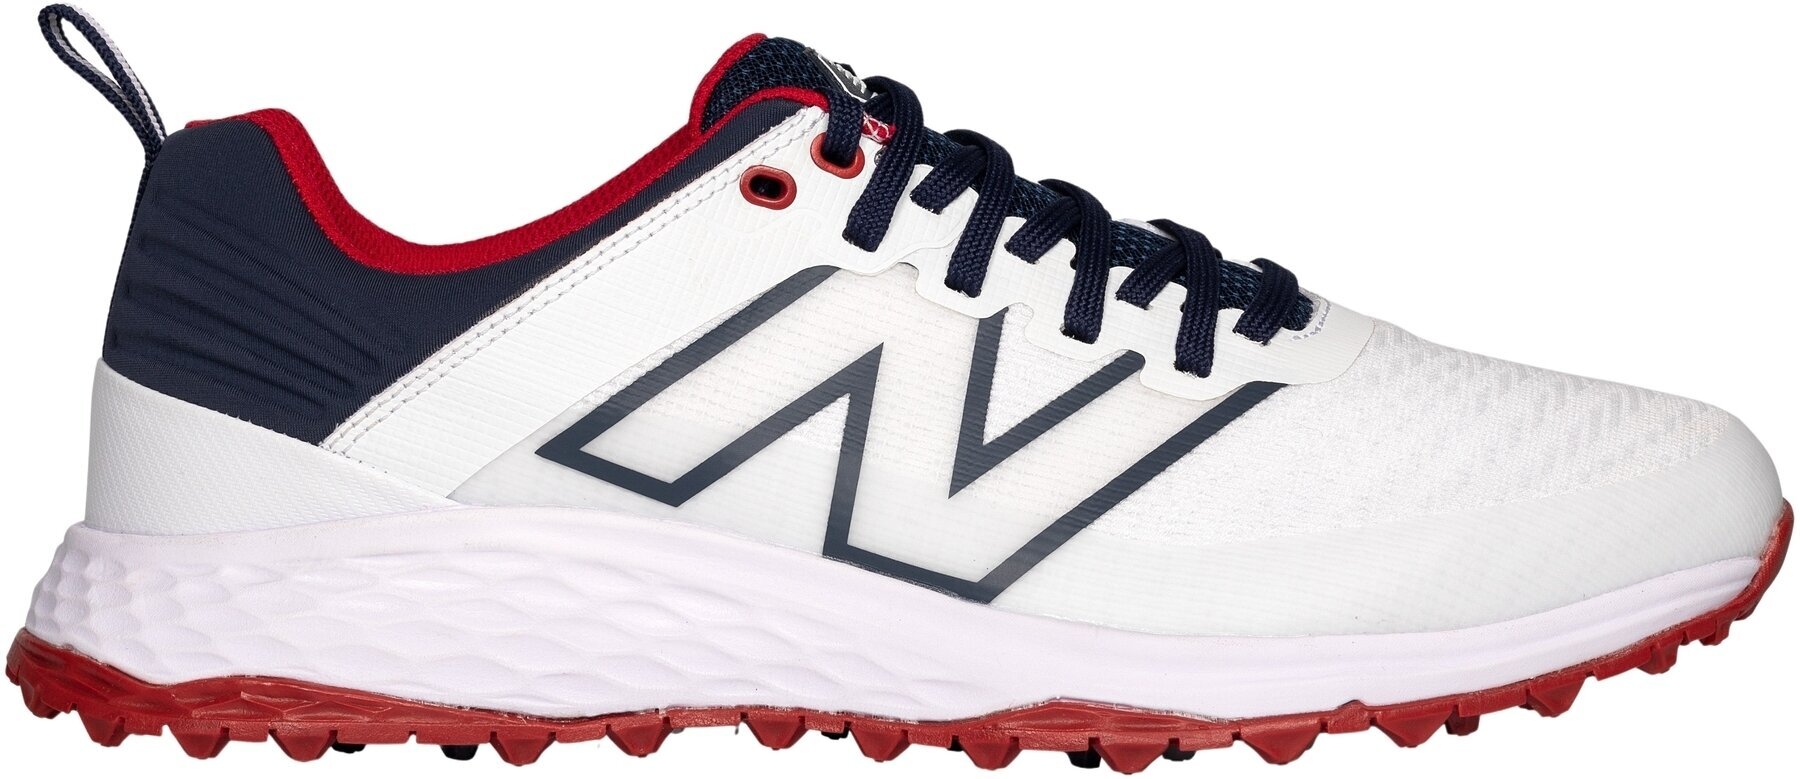 Men's golf shoes New Balance Contend Mens Golf Shoes White/Navy 42